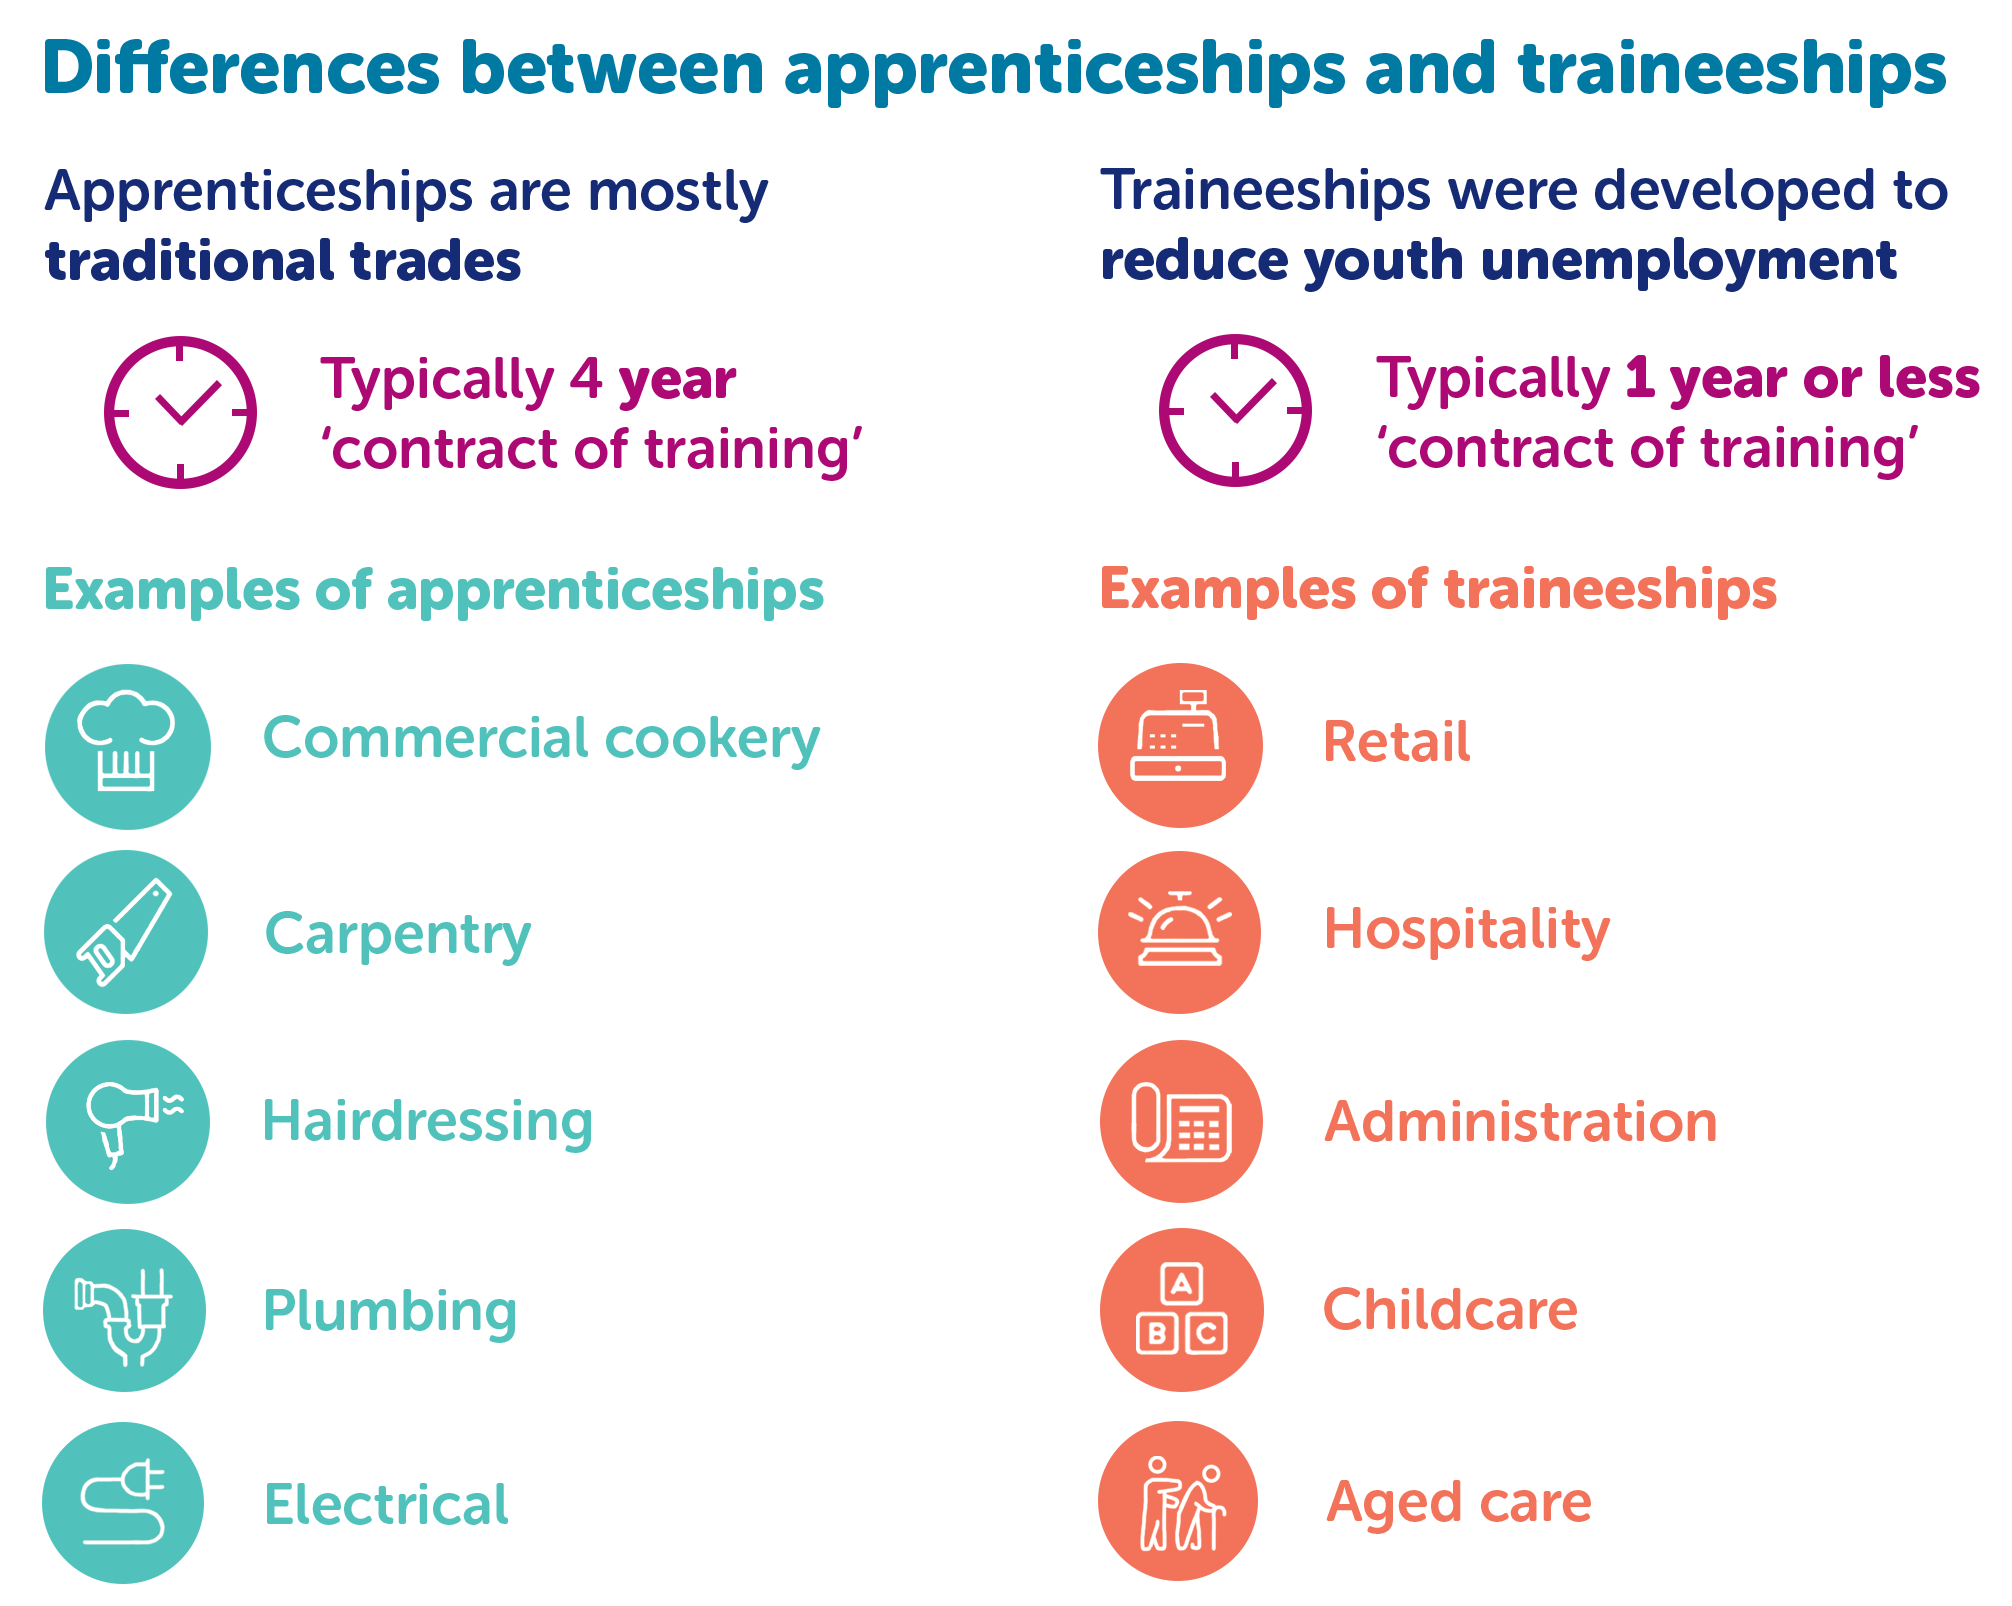 Differences between apprenticeships and traineeships. Text alternative provided below the image.